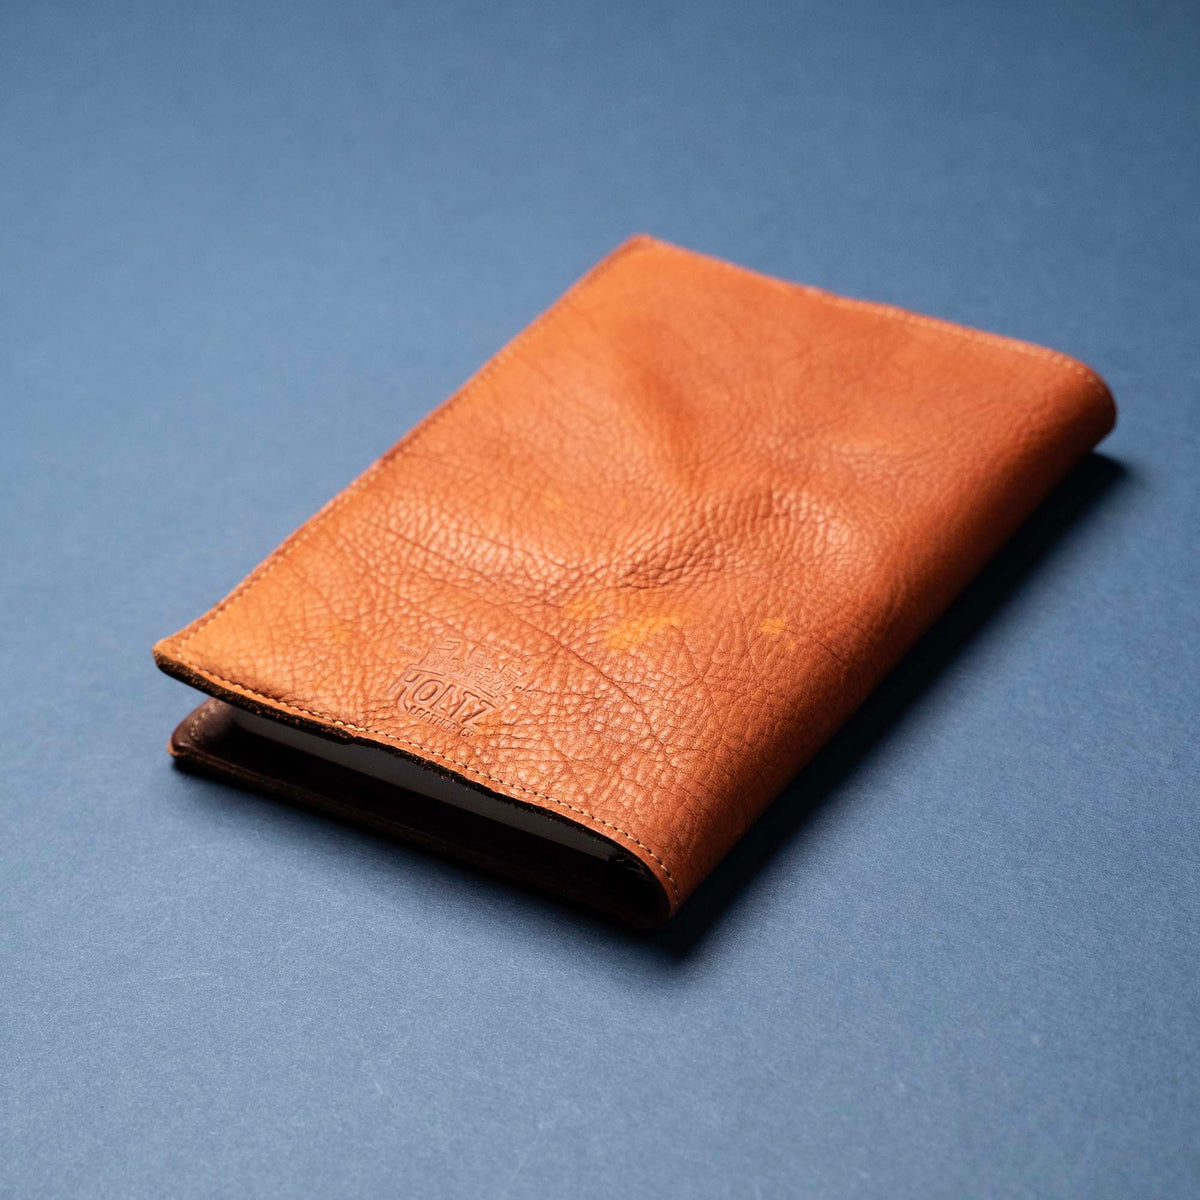 Orange Bison Leather - A5 Leather Journal - Personalized High Character (One-Of-A-Kind) Notebooks - 192 pages 8.75” x 6.25”